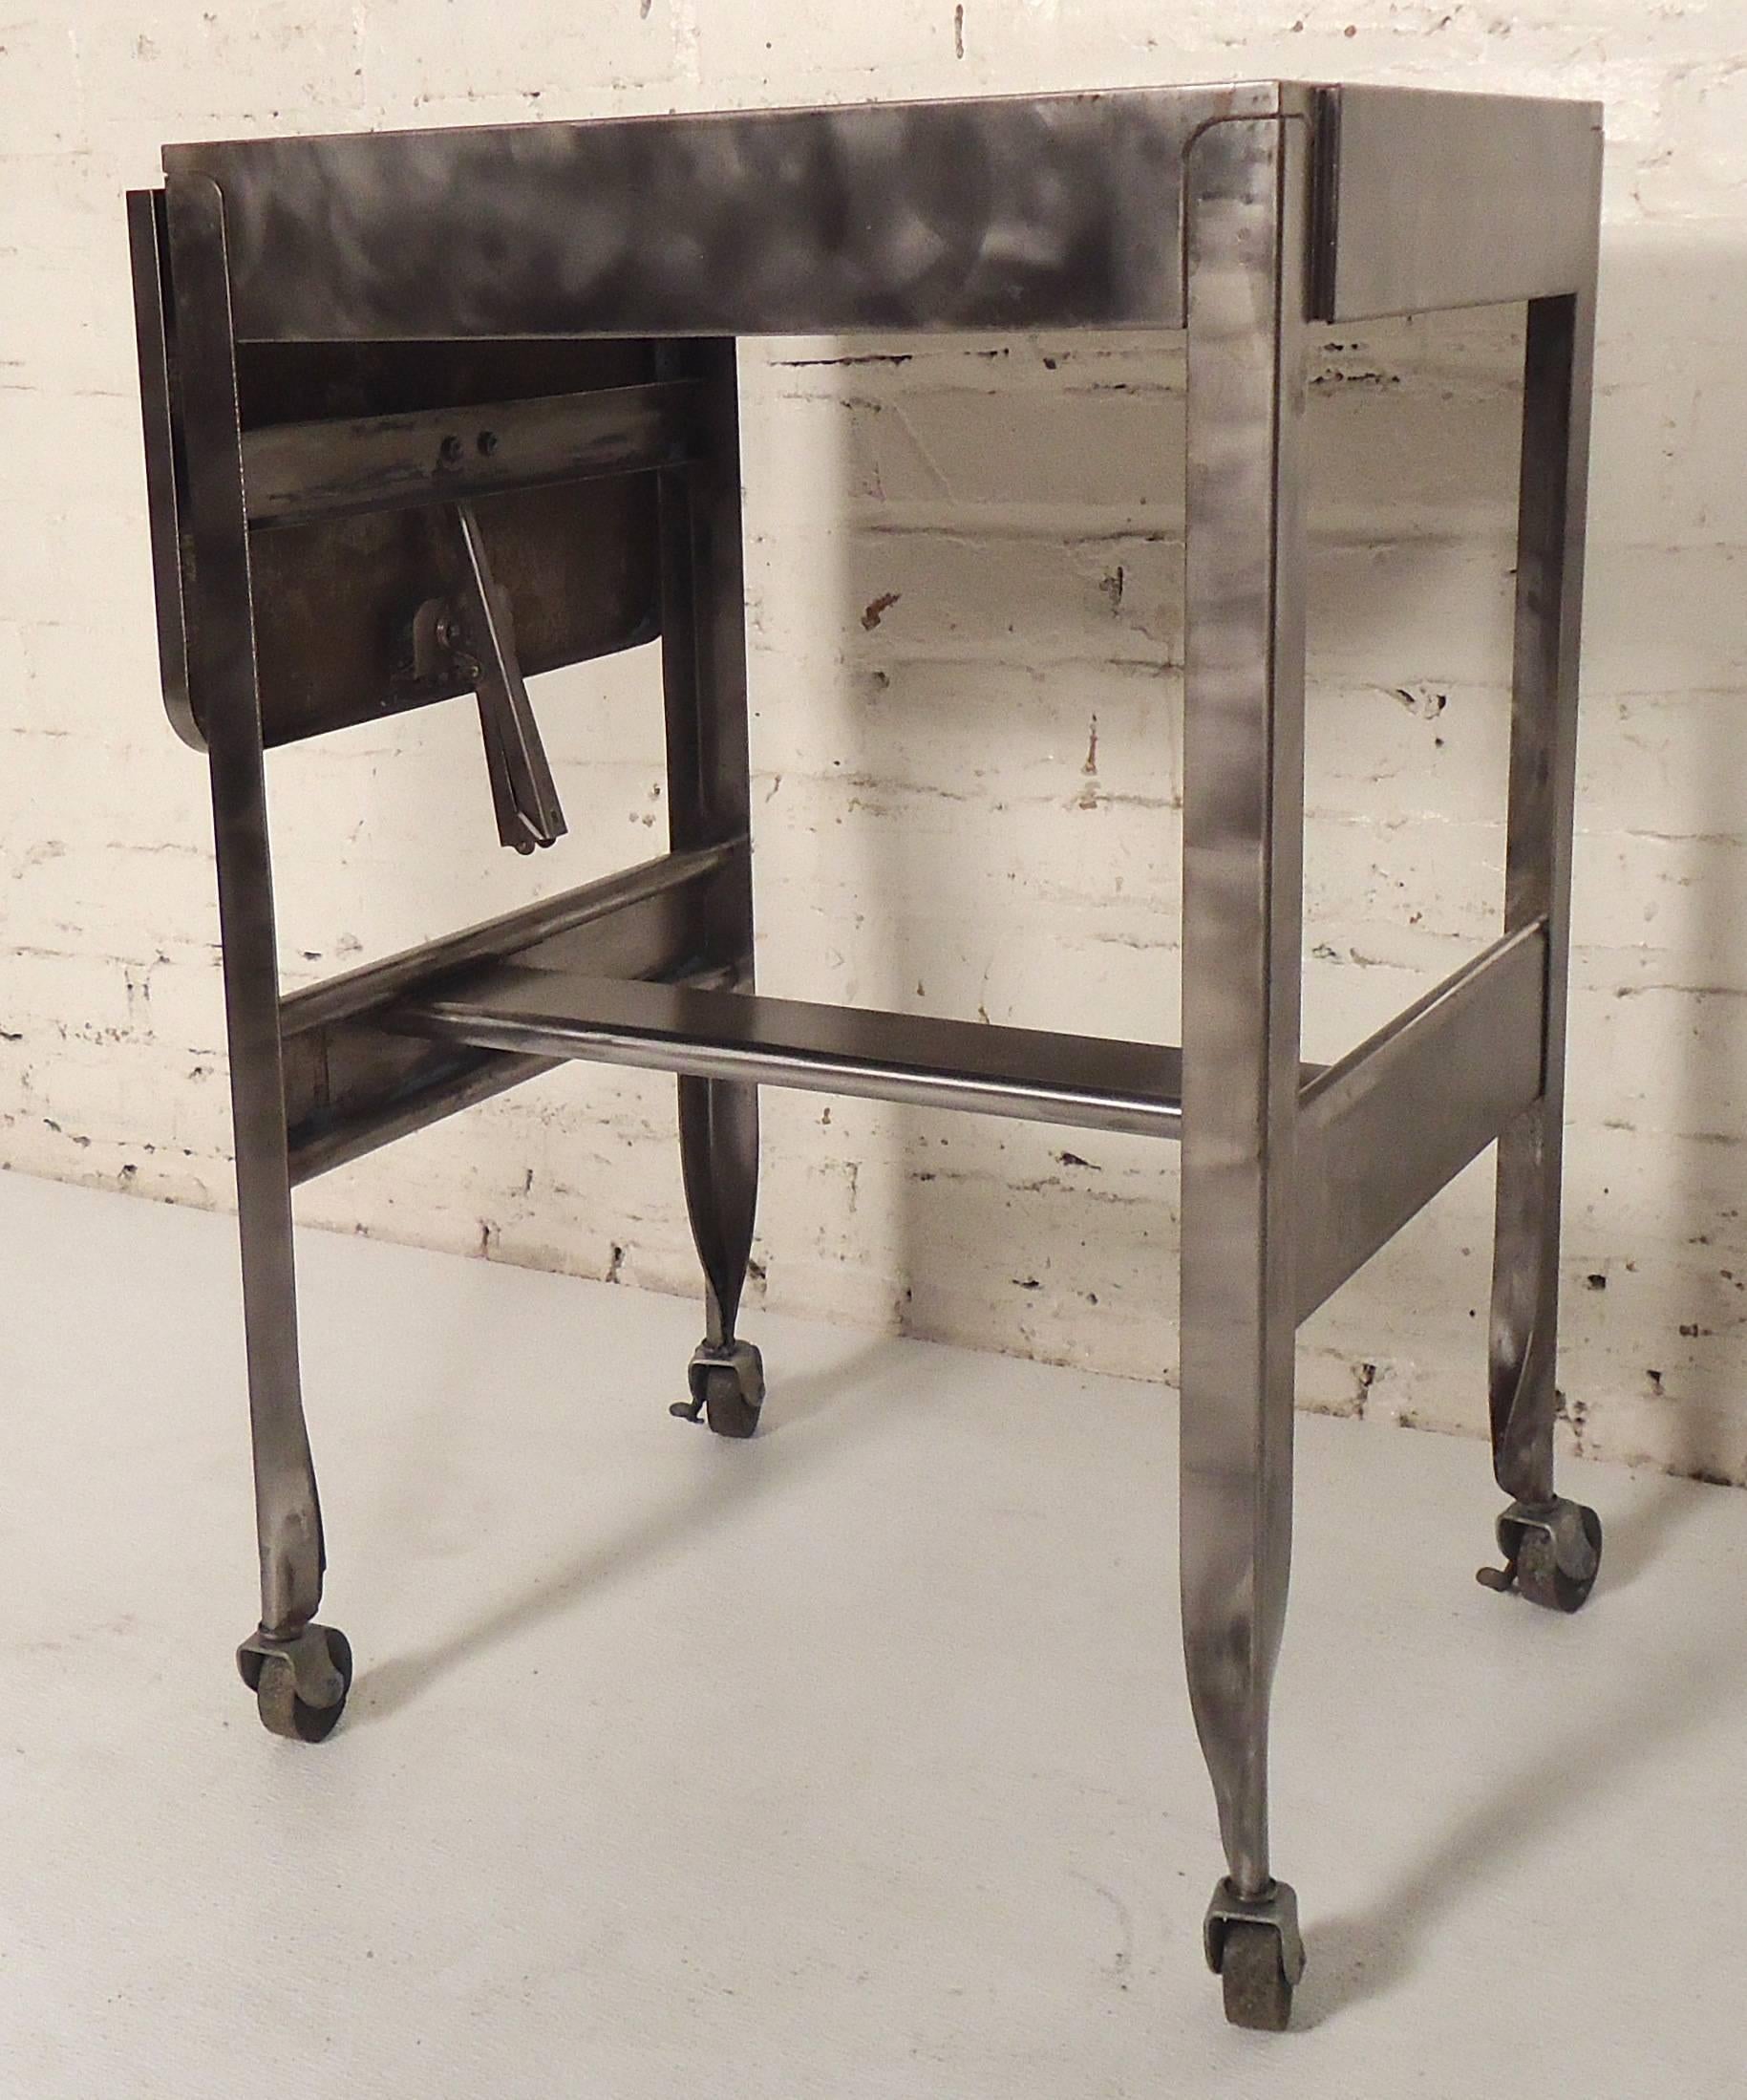 Small side table restored in a bare metal style finish. Features a drop leaf extension and locking wheels.
Opens to 27